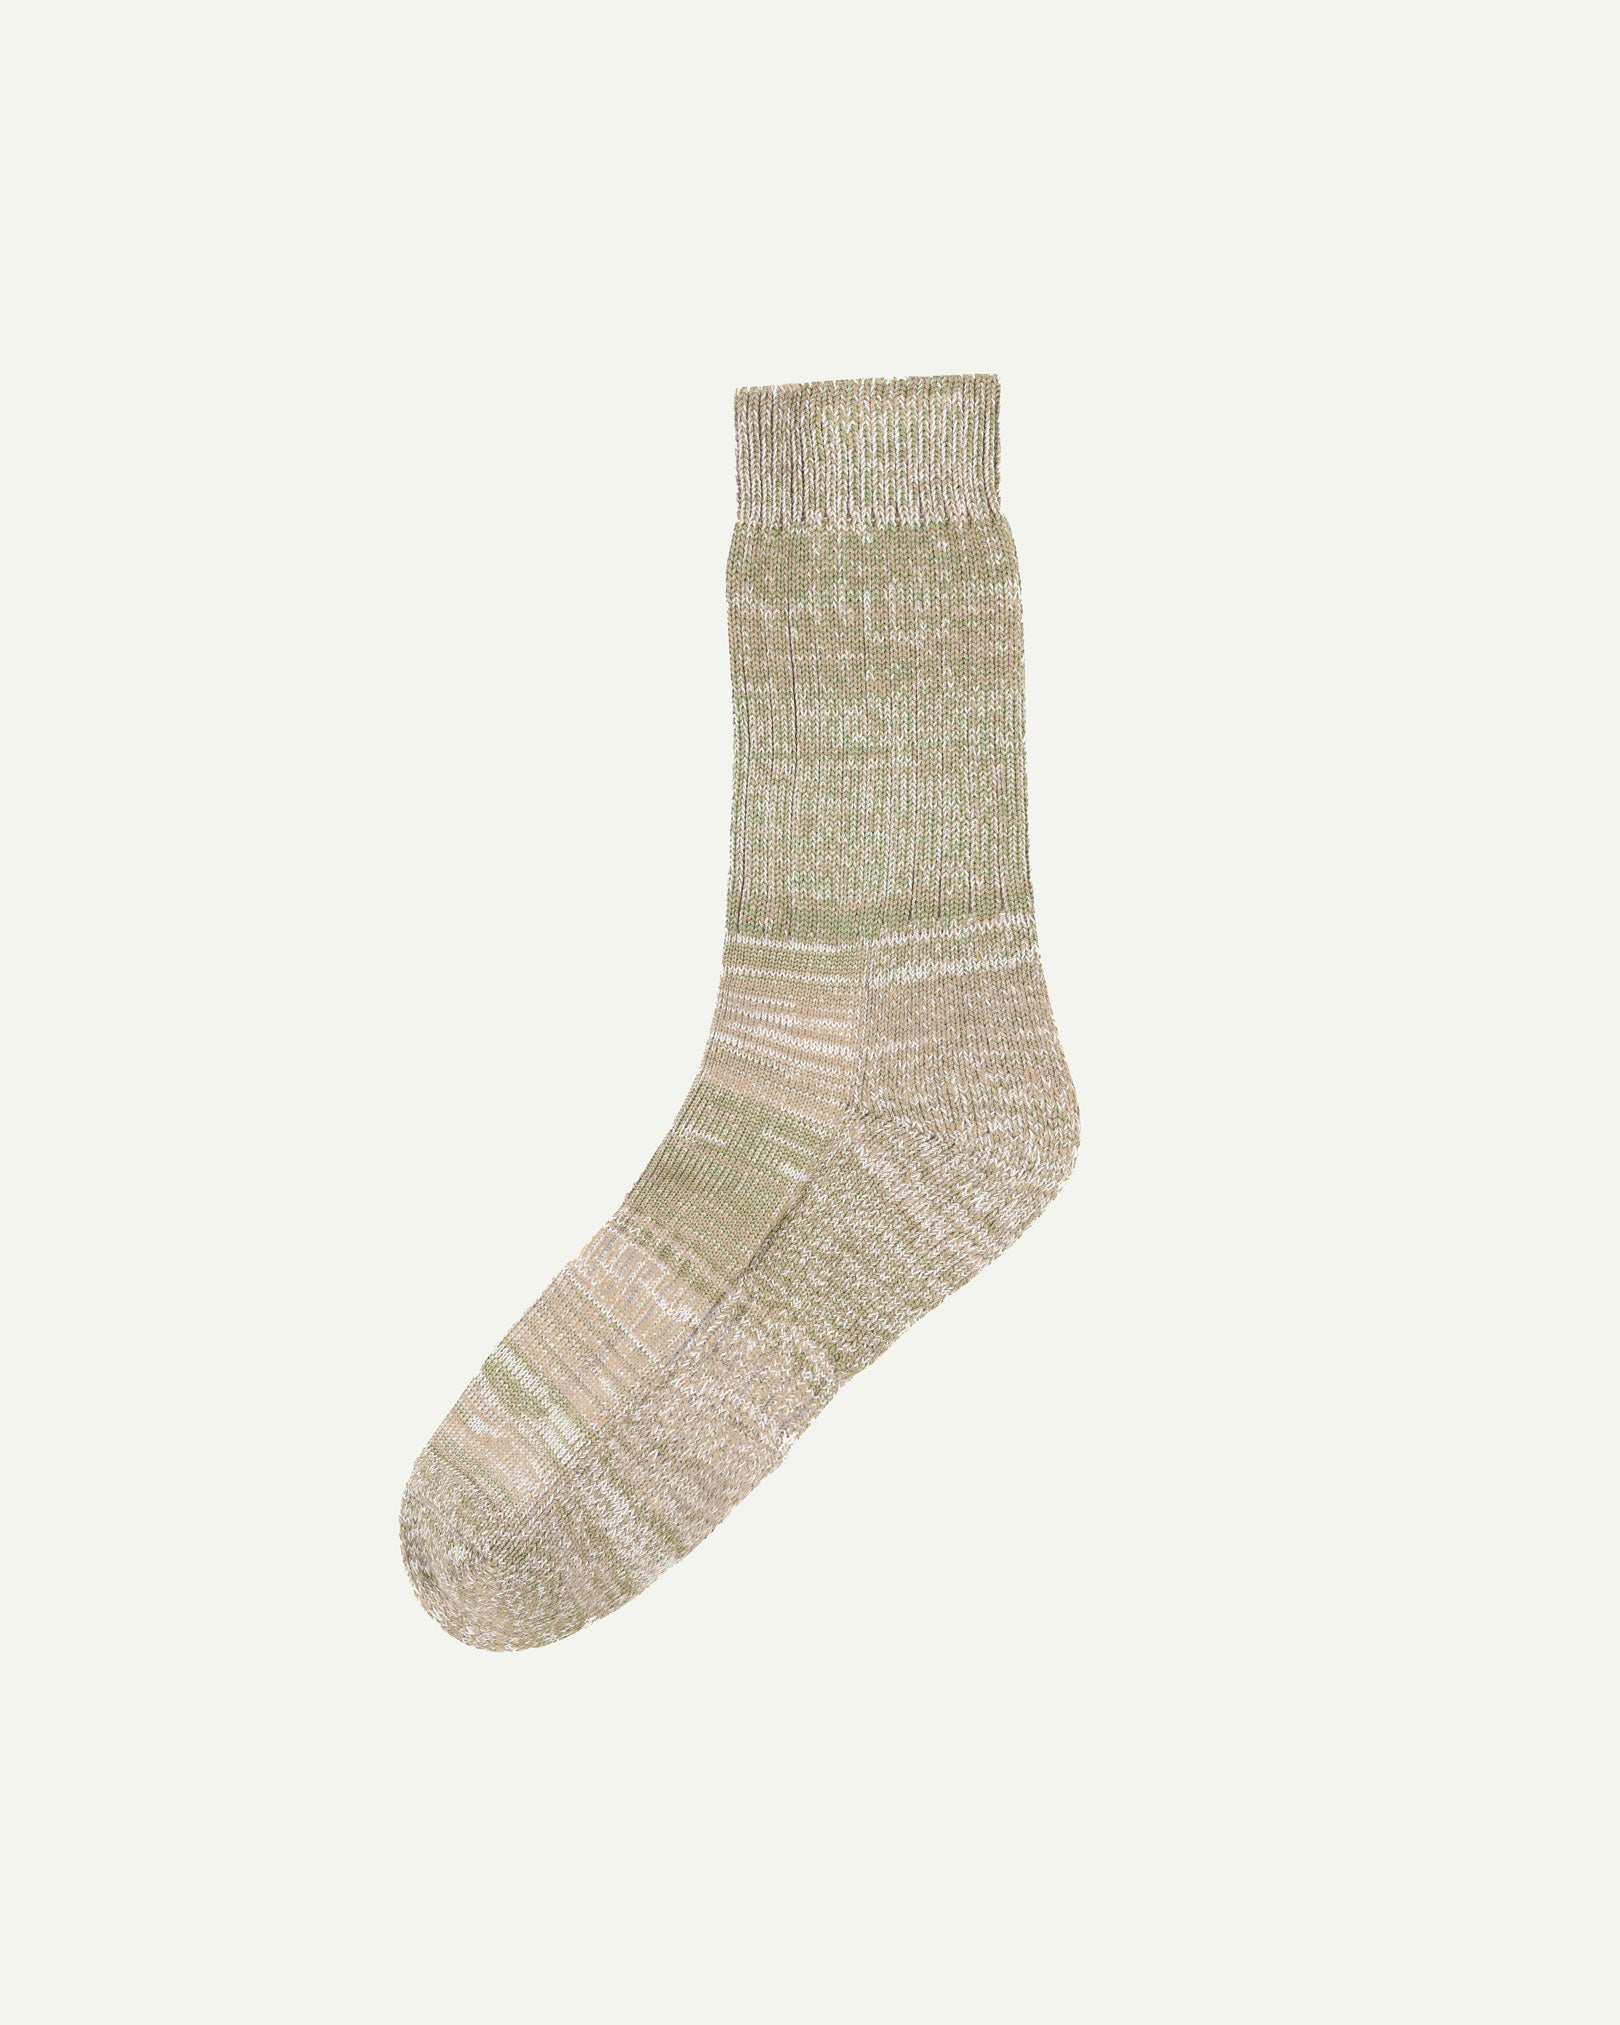 Flat view of Uskees 4006 khaki mix organic cotton sock, showing bands of khaki-green, black and beige.